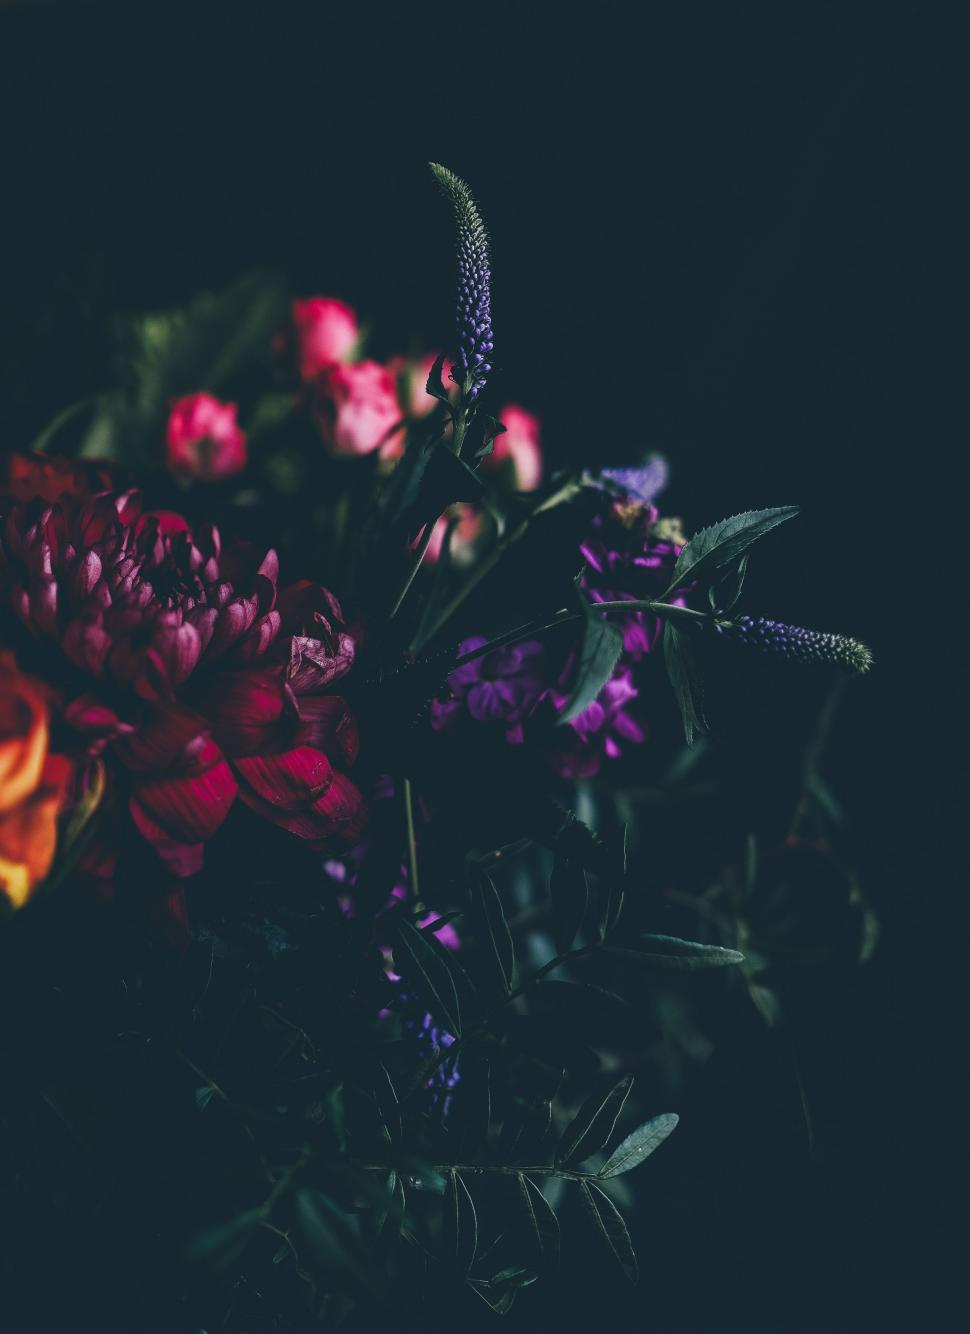 Free Image of Collection of Various Flowers Arranged in a Vase 